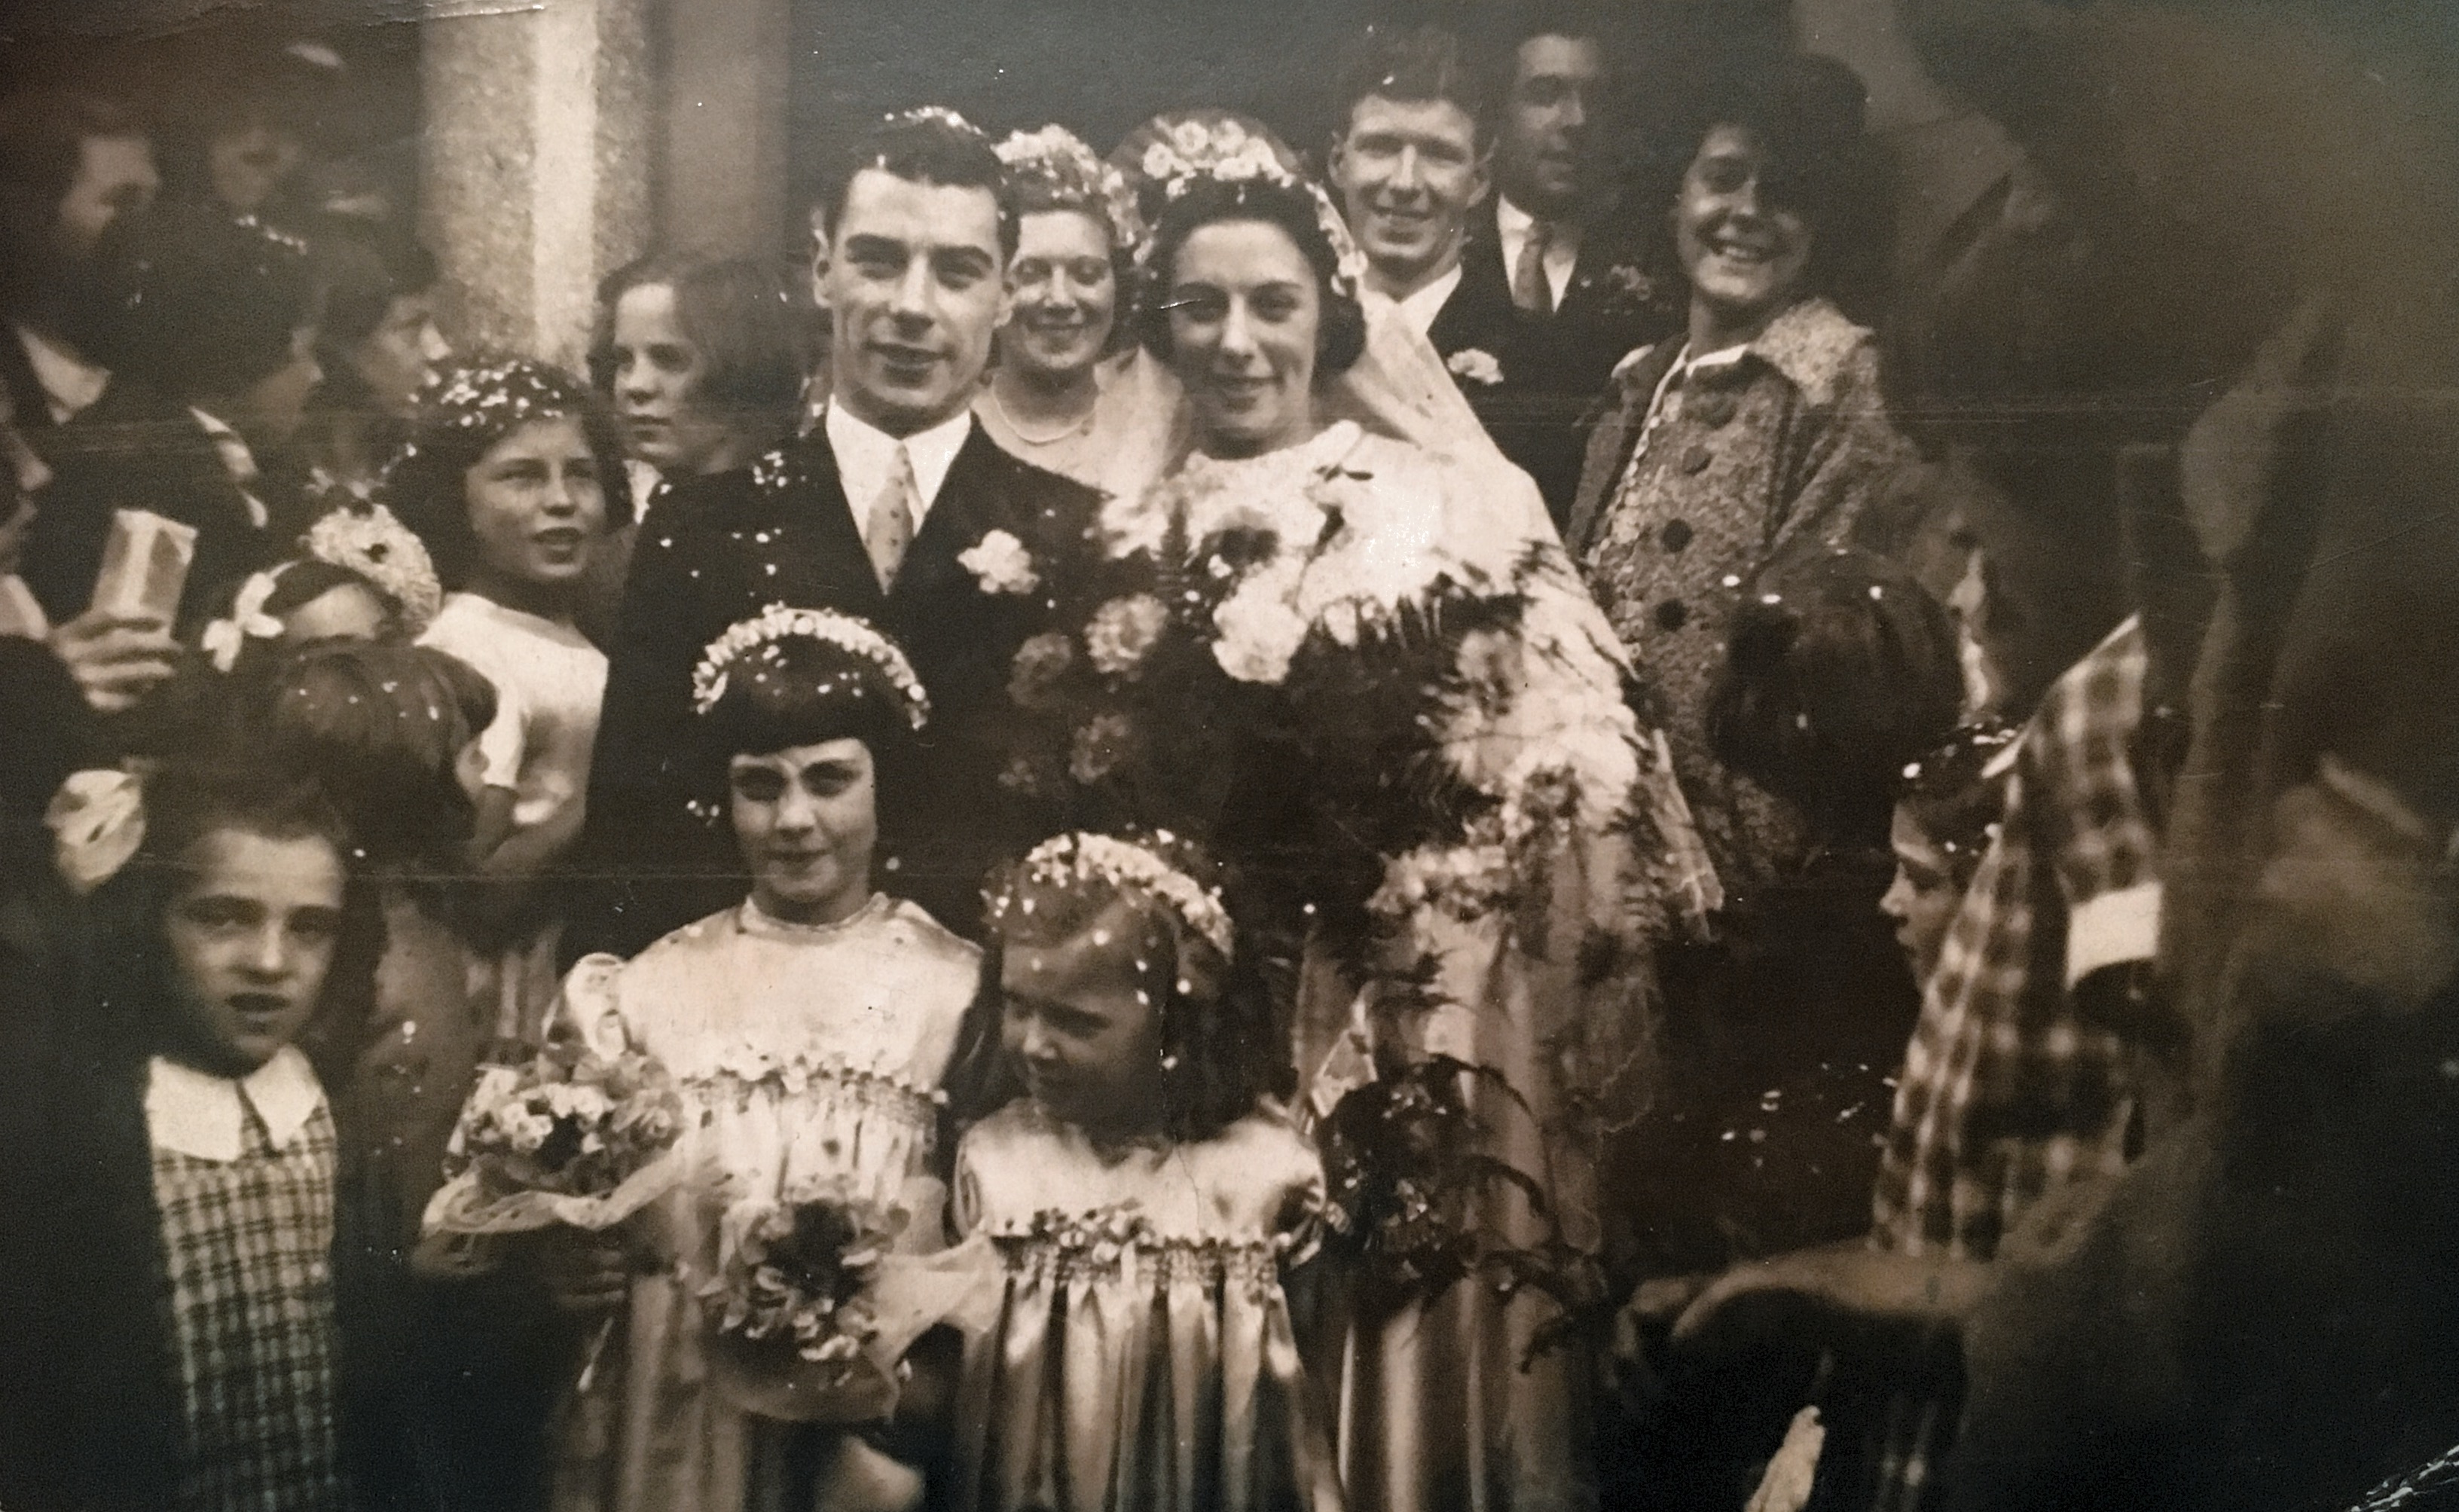 A wedding at some point in the 1930s. I don’t know who the couple are, but my grandmother is standing in the background to the right. 